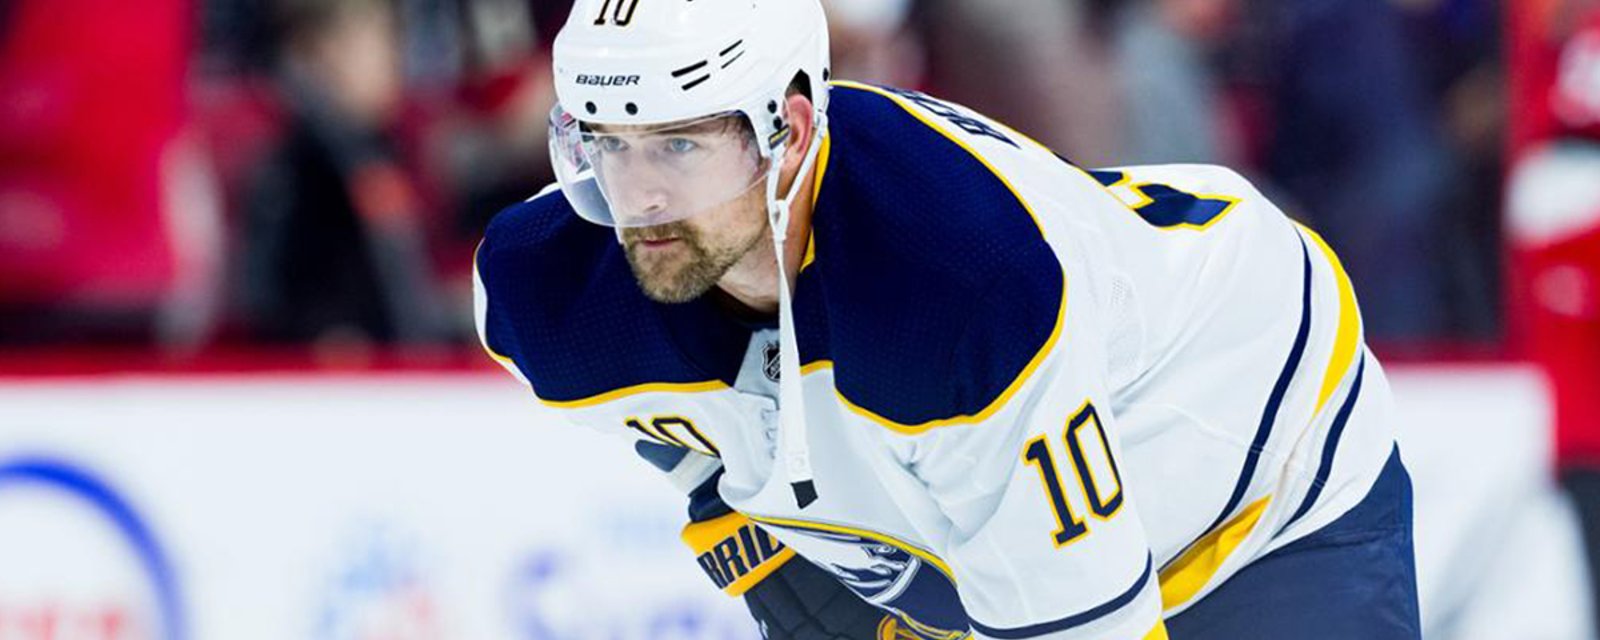 Report: The ugly details behind Berglund’s contract termination